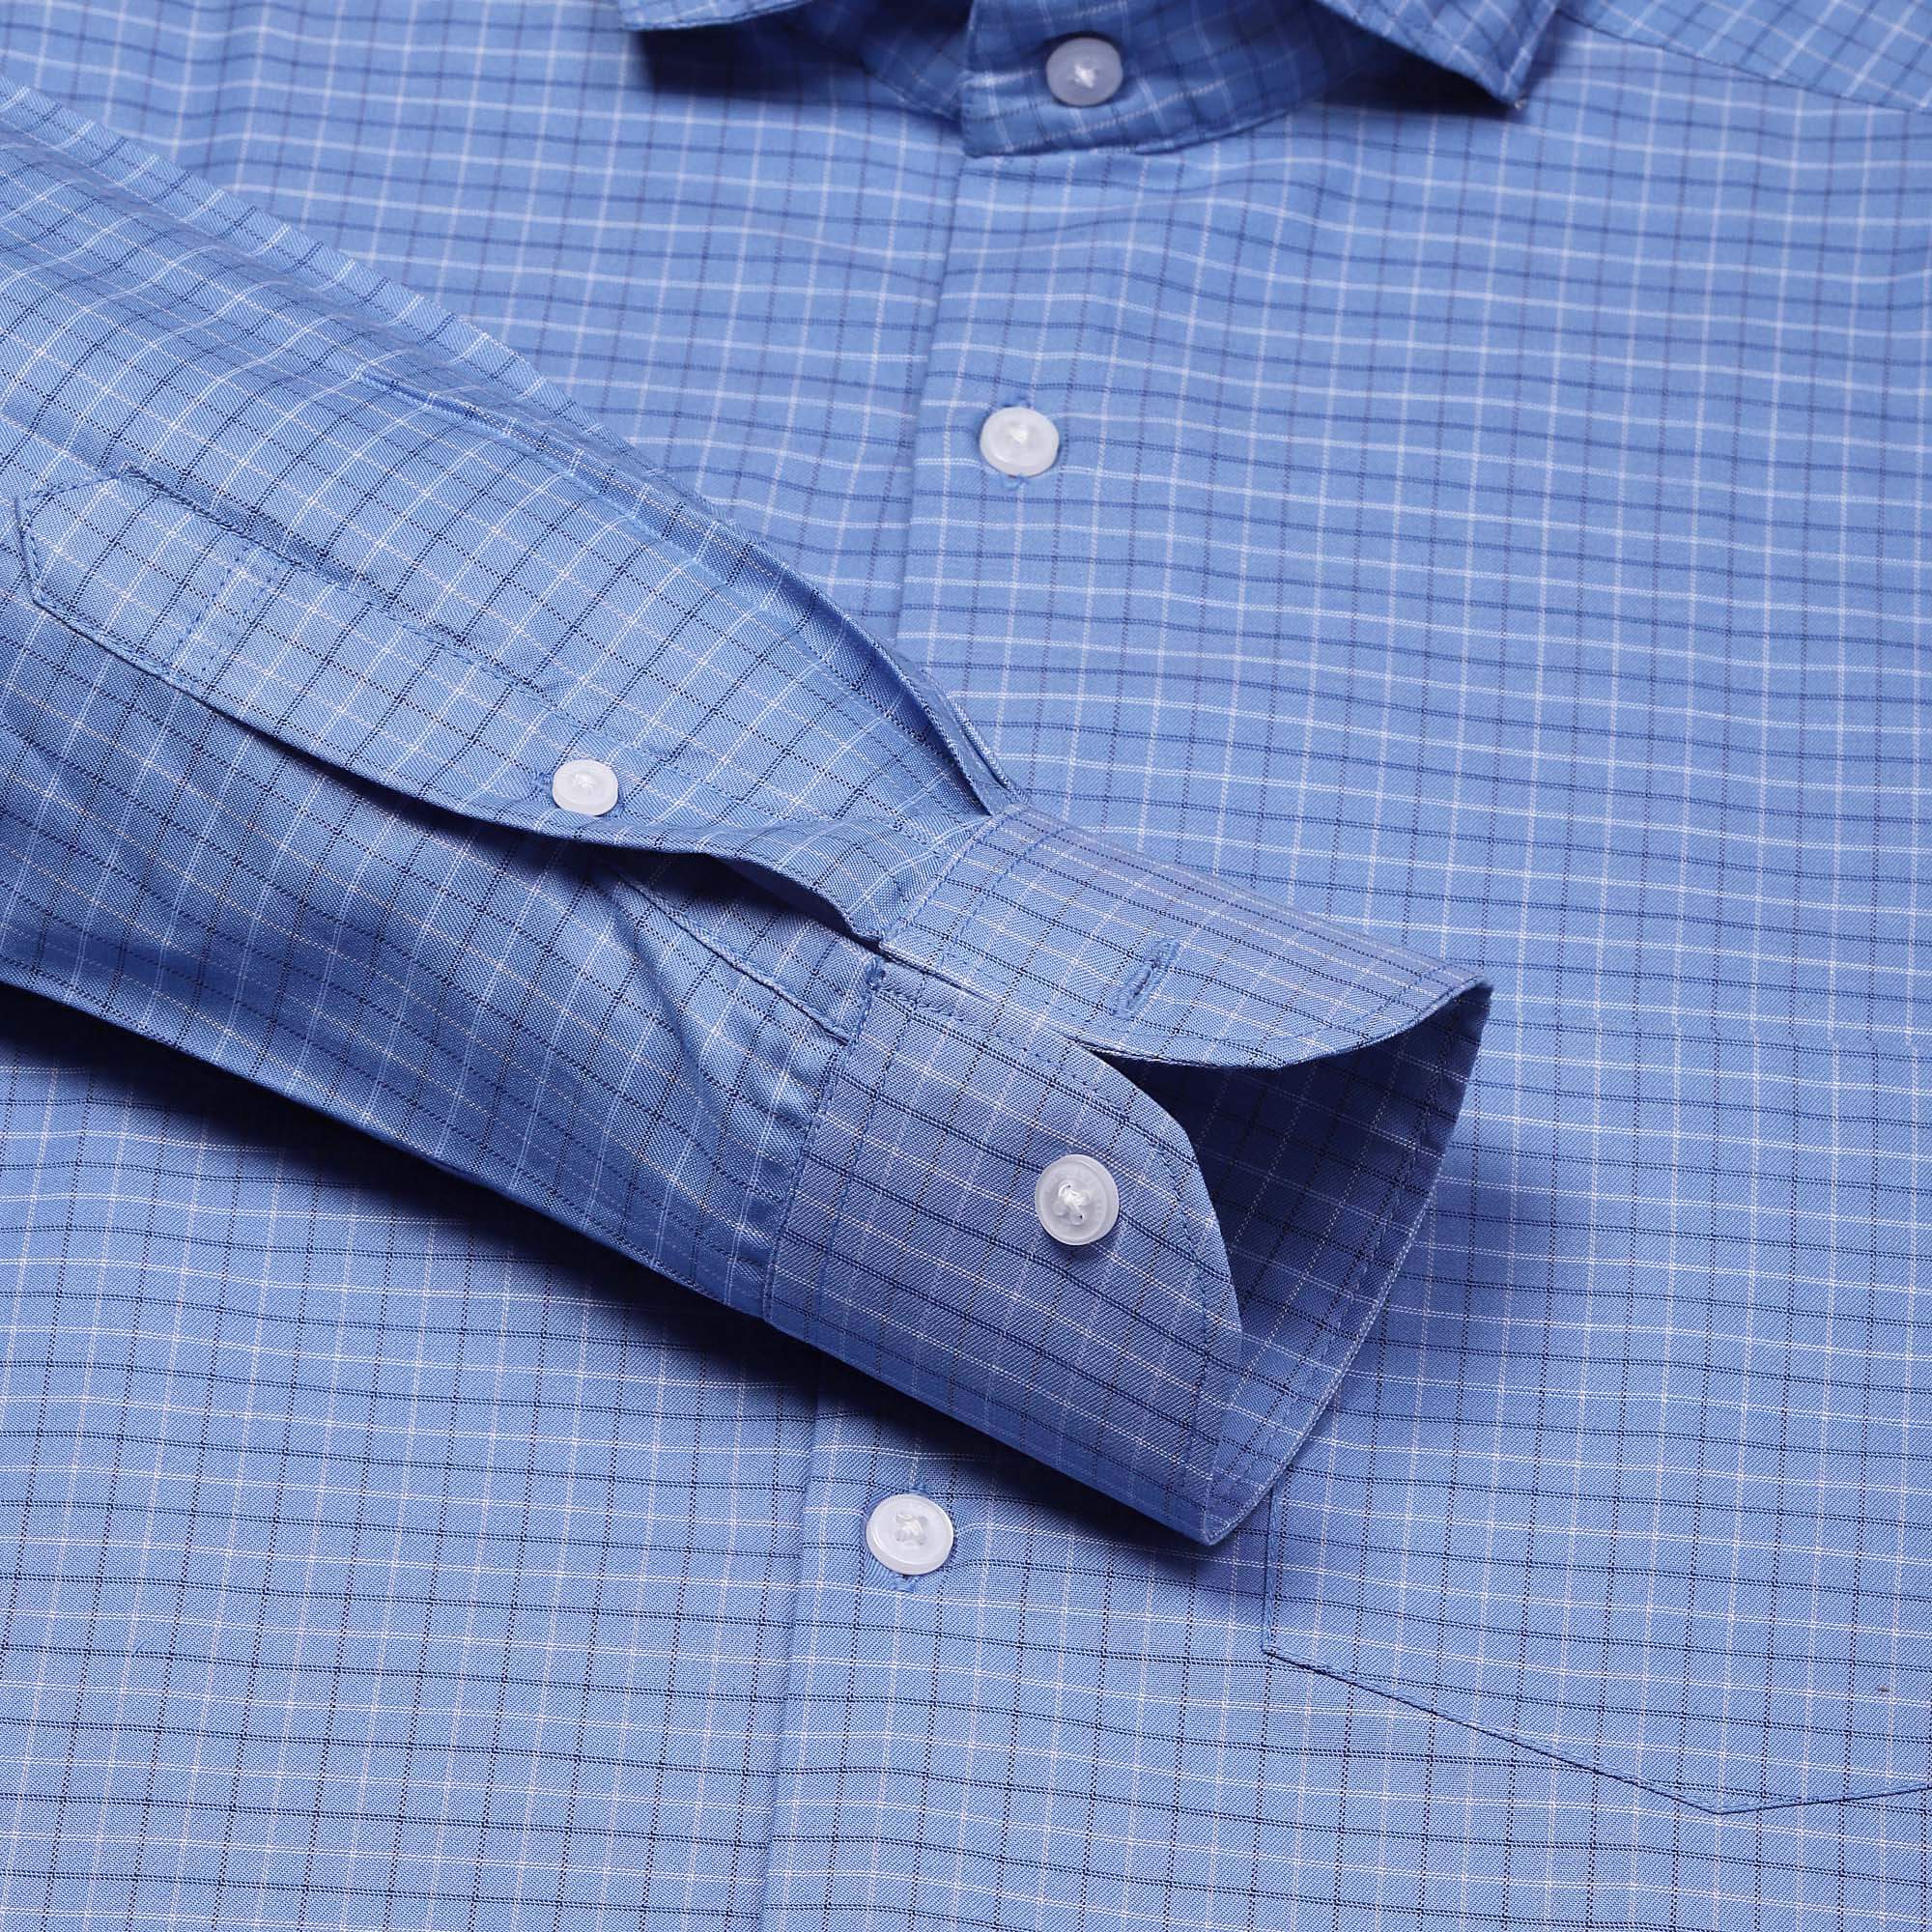 Eclipse Twill Check Shirt In Blue  Slim Fit - The Formal Club